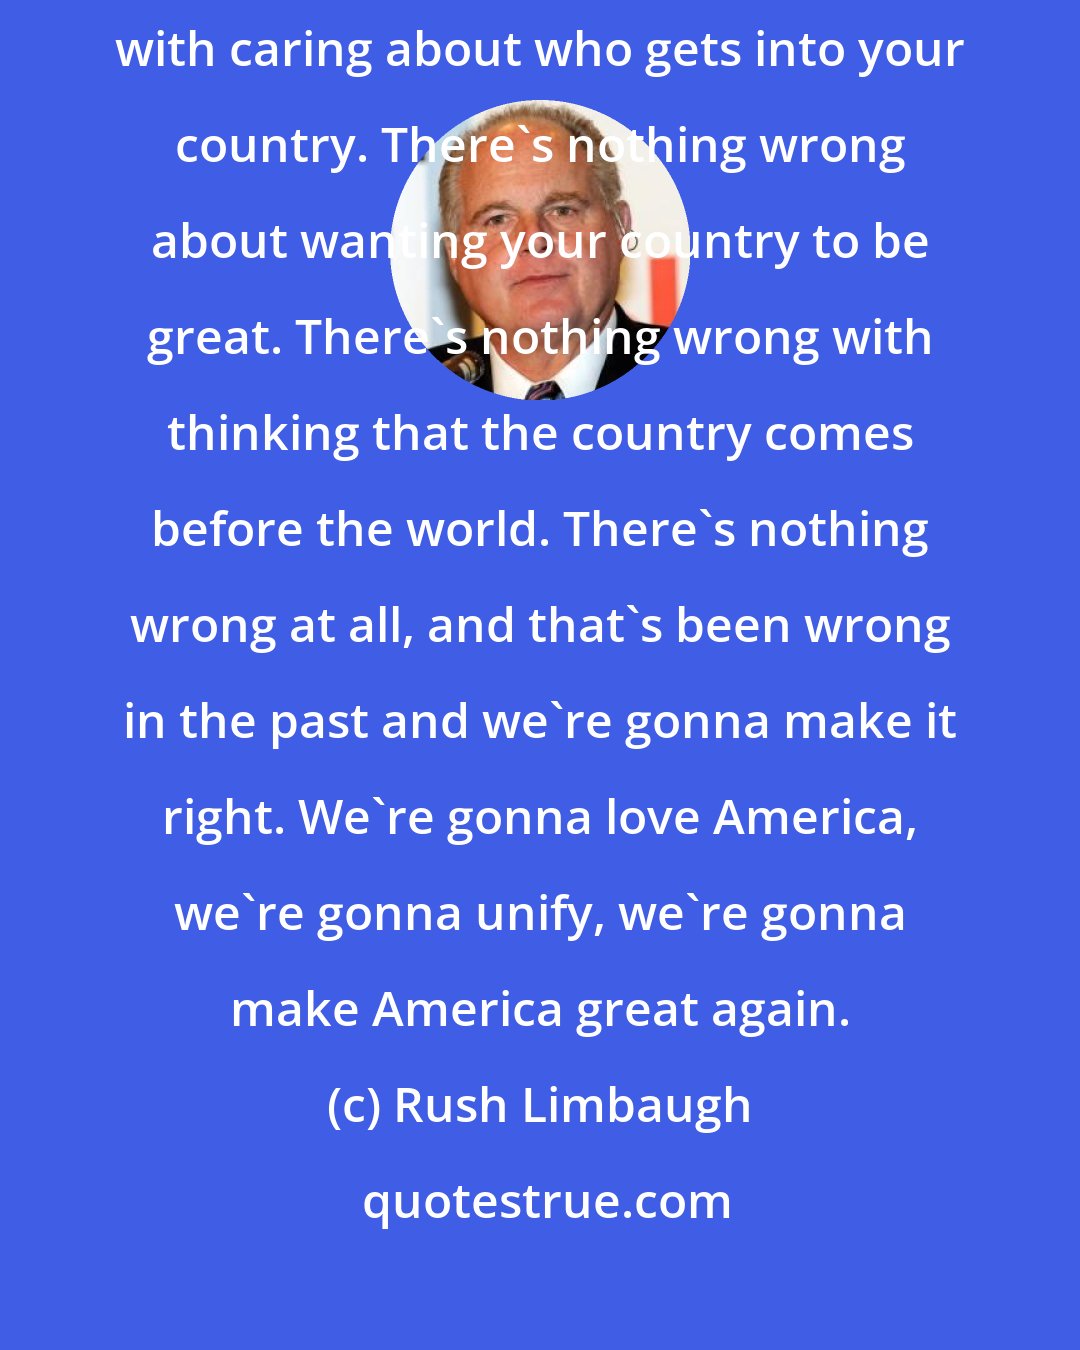 Rush Limbaugh: There's nothing wrong with loving your country. There's nothing wrong with caring about who gets into your country. There's nothing wrong about wanting your country to be great. There's nothing wrong with thinking that the country comes before the world. There's nothing wrong at all, and that's been wrong in the past and we're gonna make it right. We're gonna love America, we're gonna unify, we're gonna make America great again.